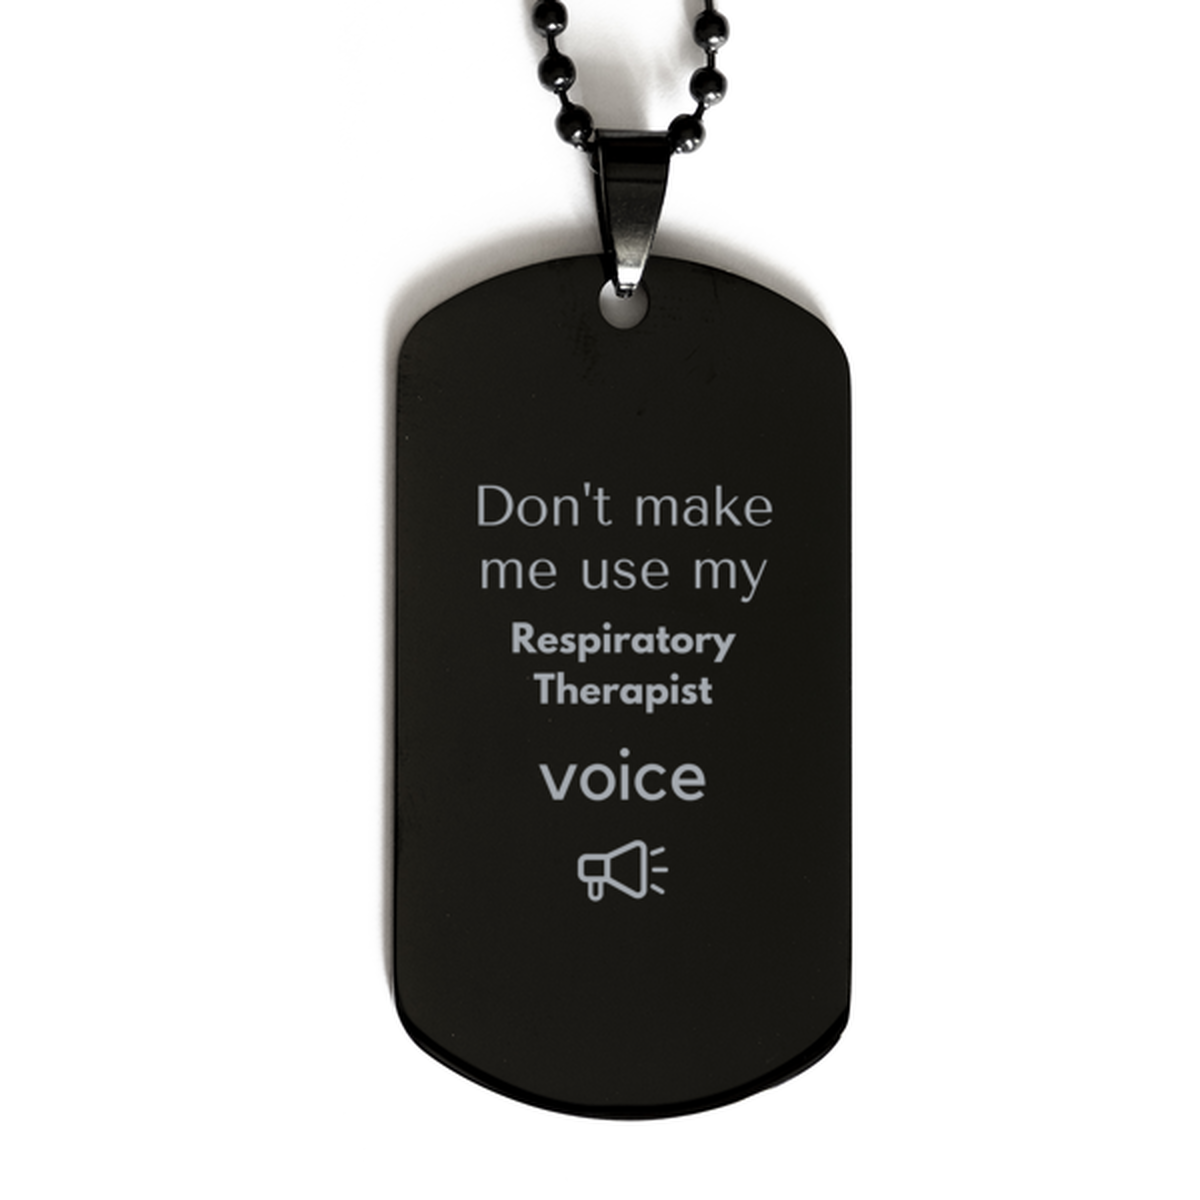 Don't make me use my Respiratory Therapist voice, Sarcasm Respiratory Therapist Gifts, Christmas Respiratory Therapist Black Dog Tag Birthday Unique Gifts For Respiratory Therapist Coworkers, Men, Women, Colleague, Friends